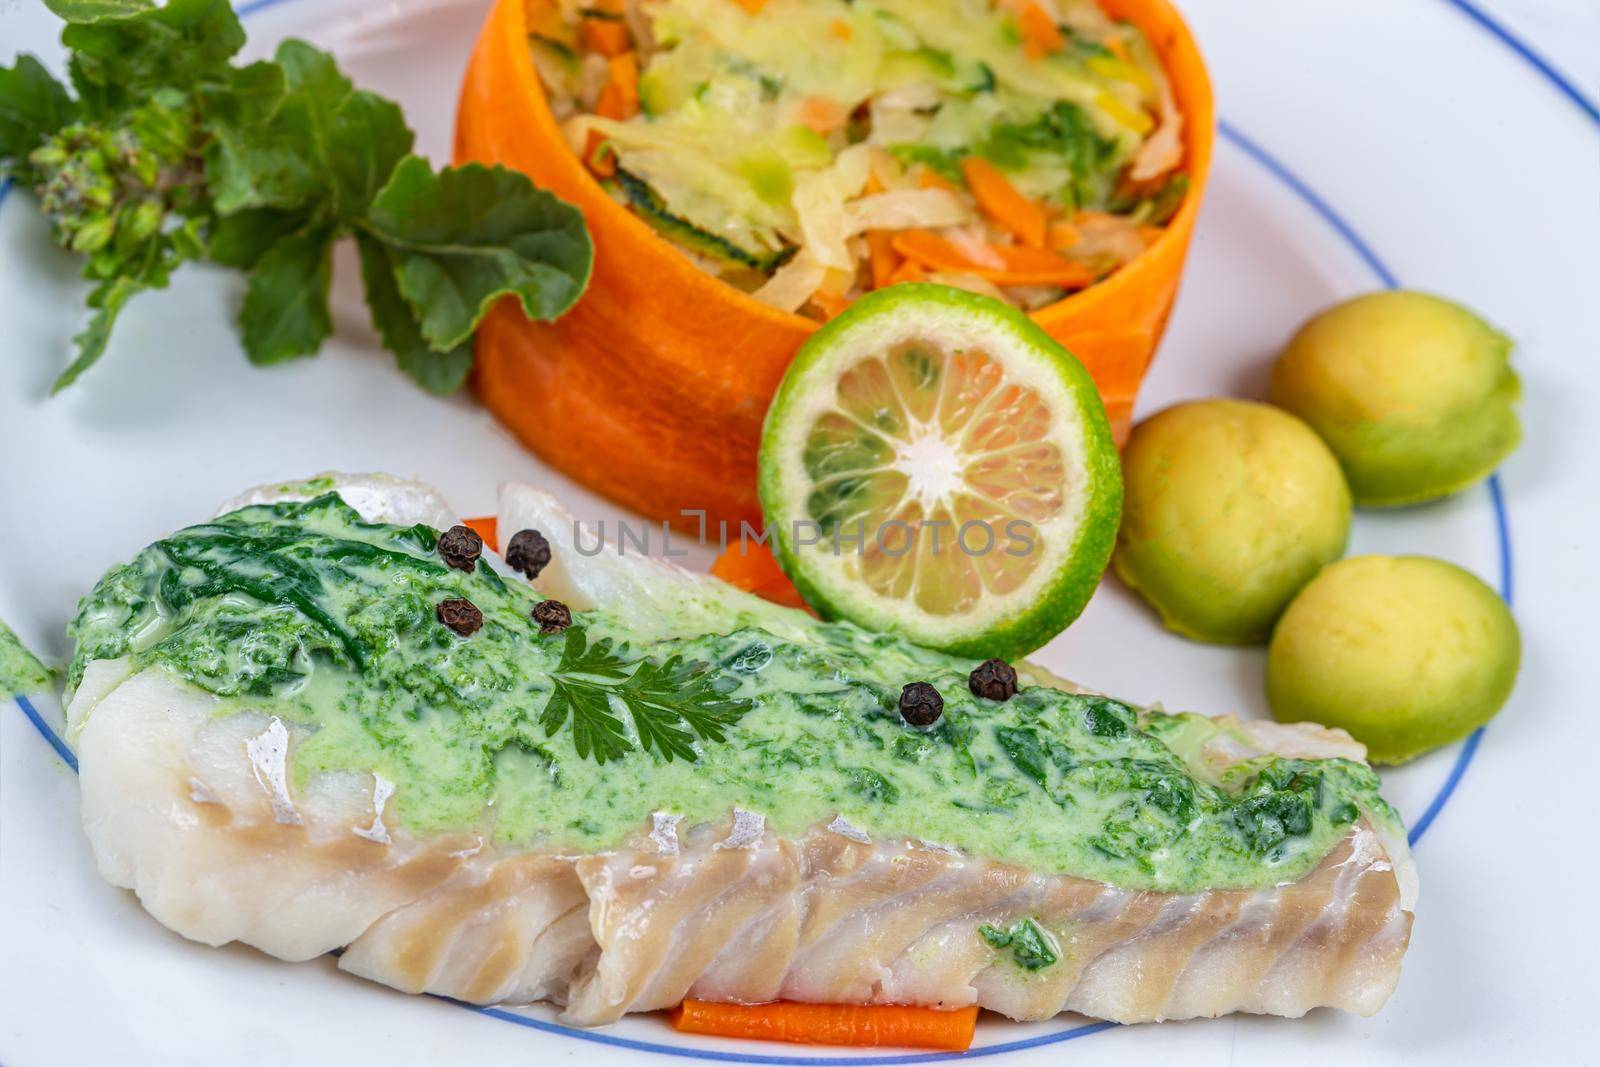 Cod back covered with sorrel sauce, accompanied by vegetables.